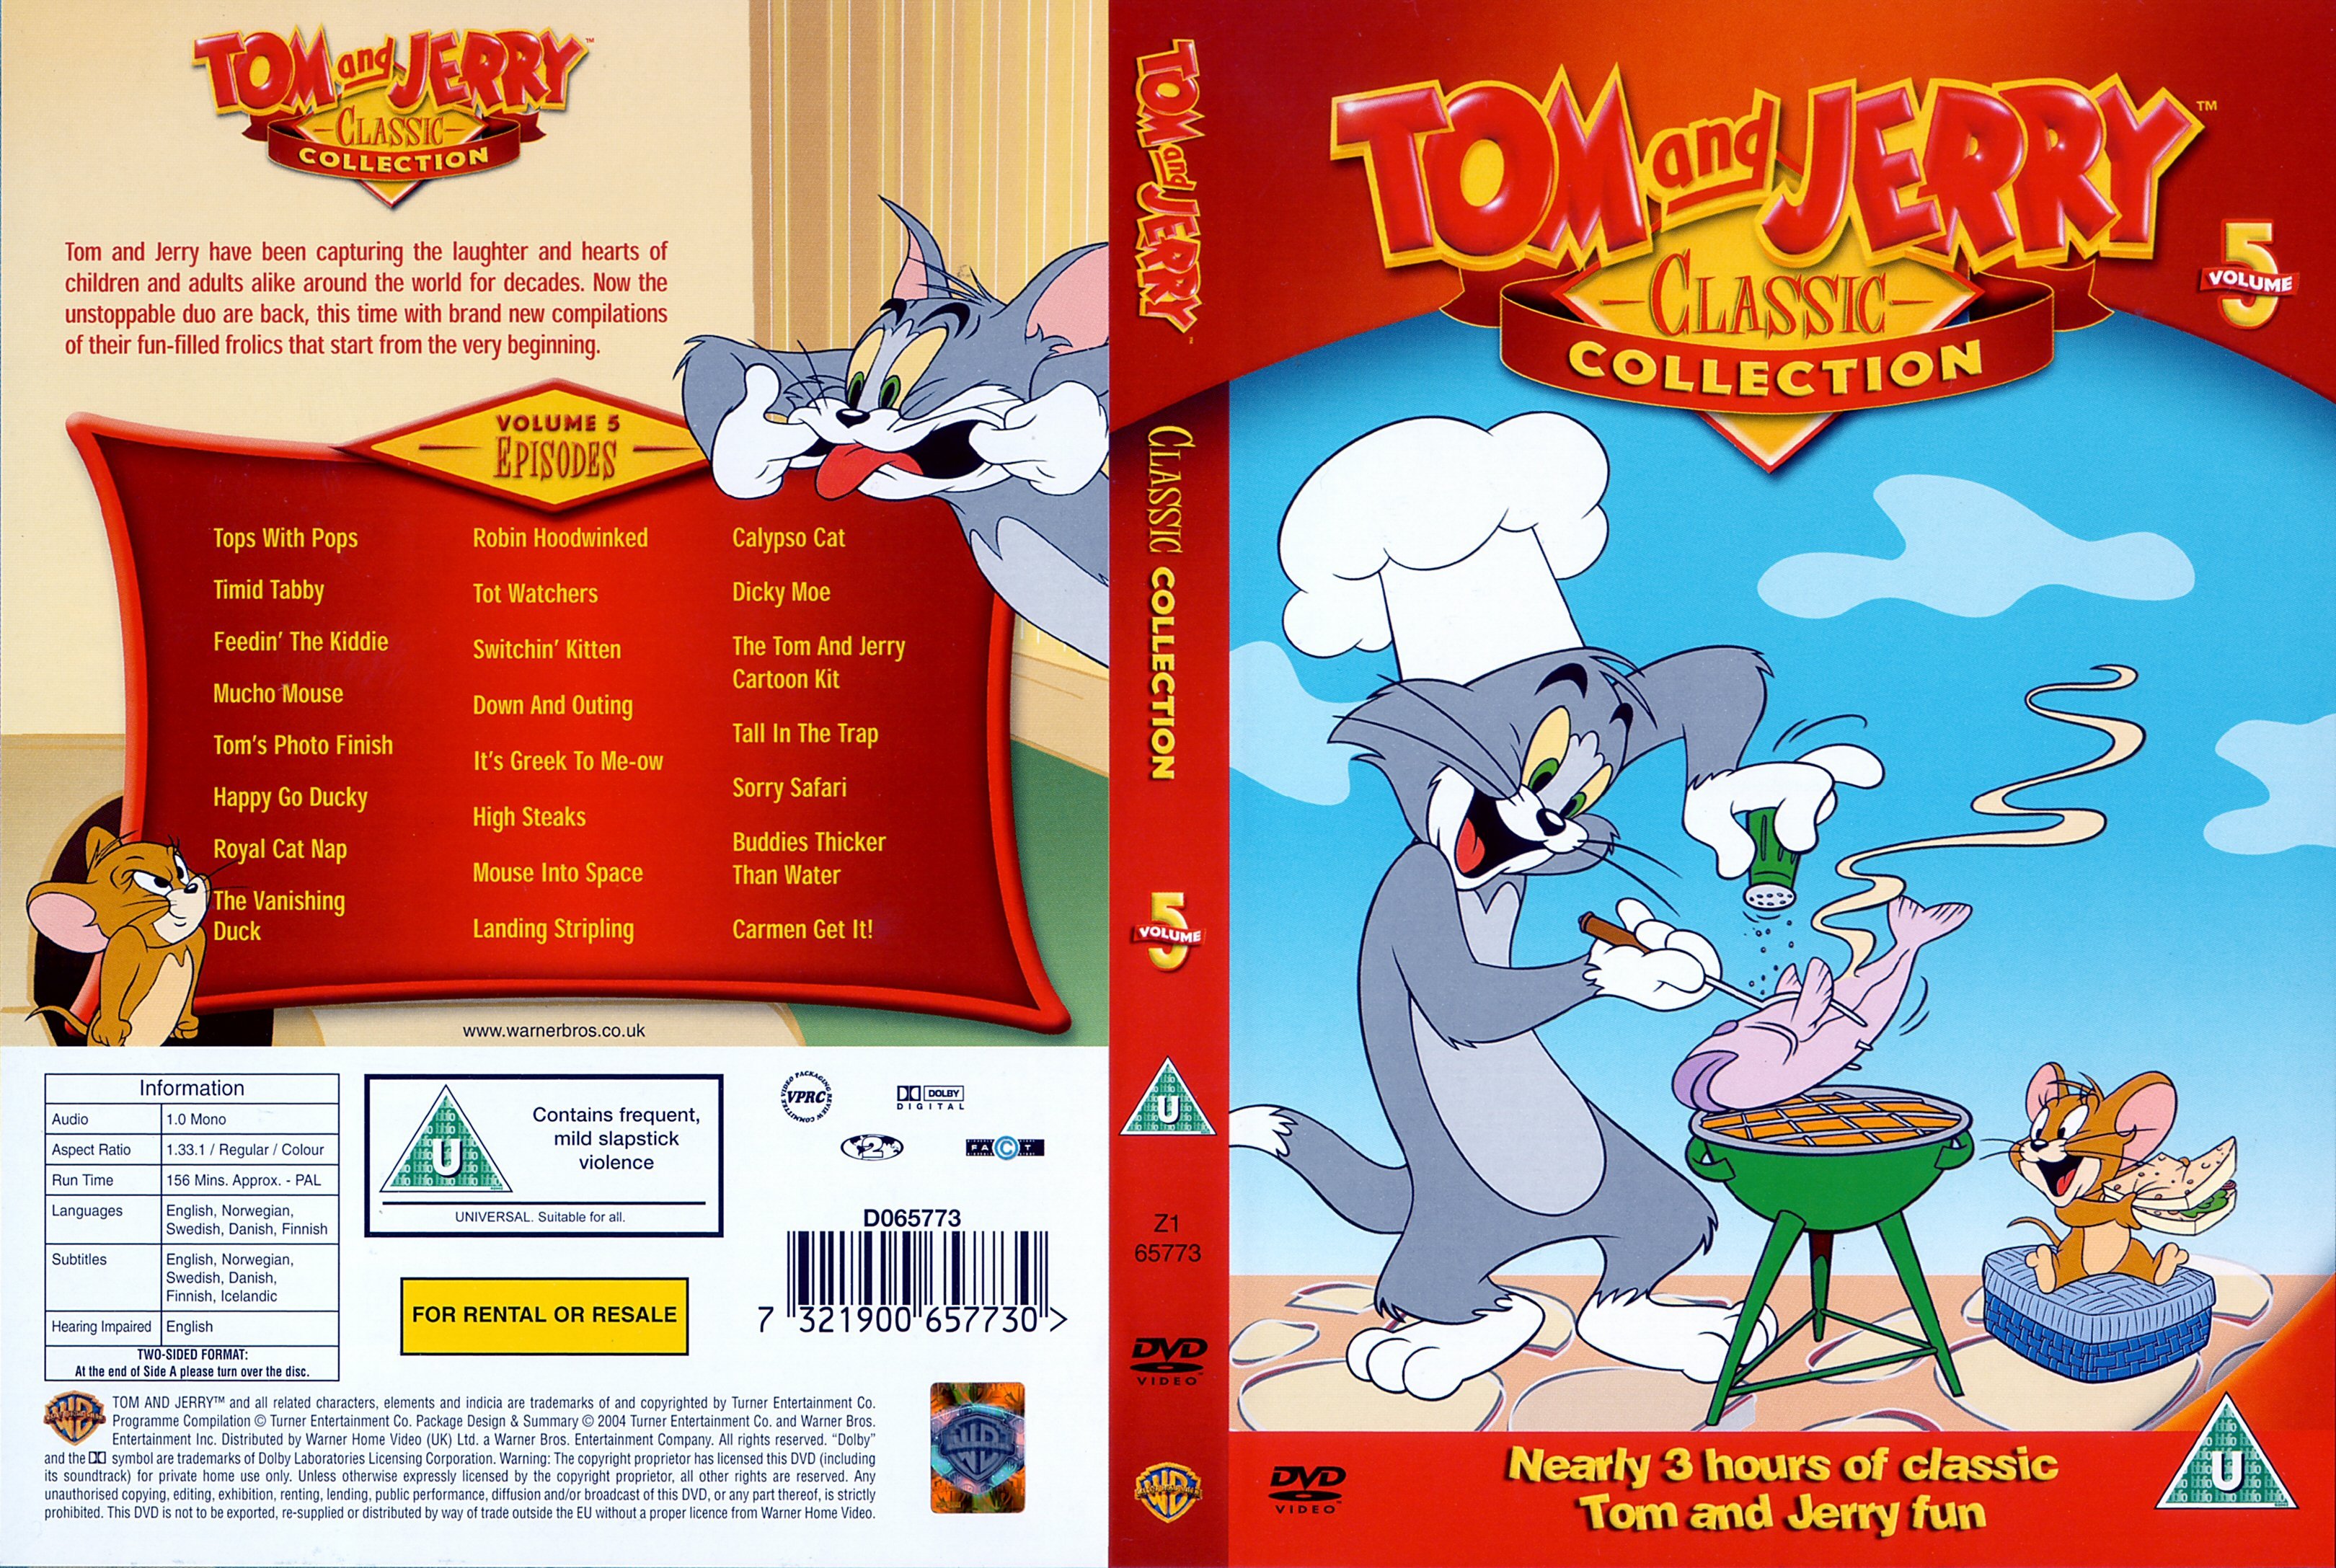 Tom And Jerry Classic Collection